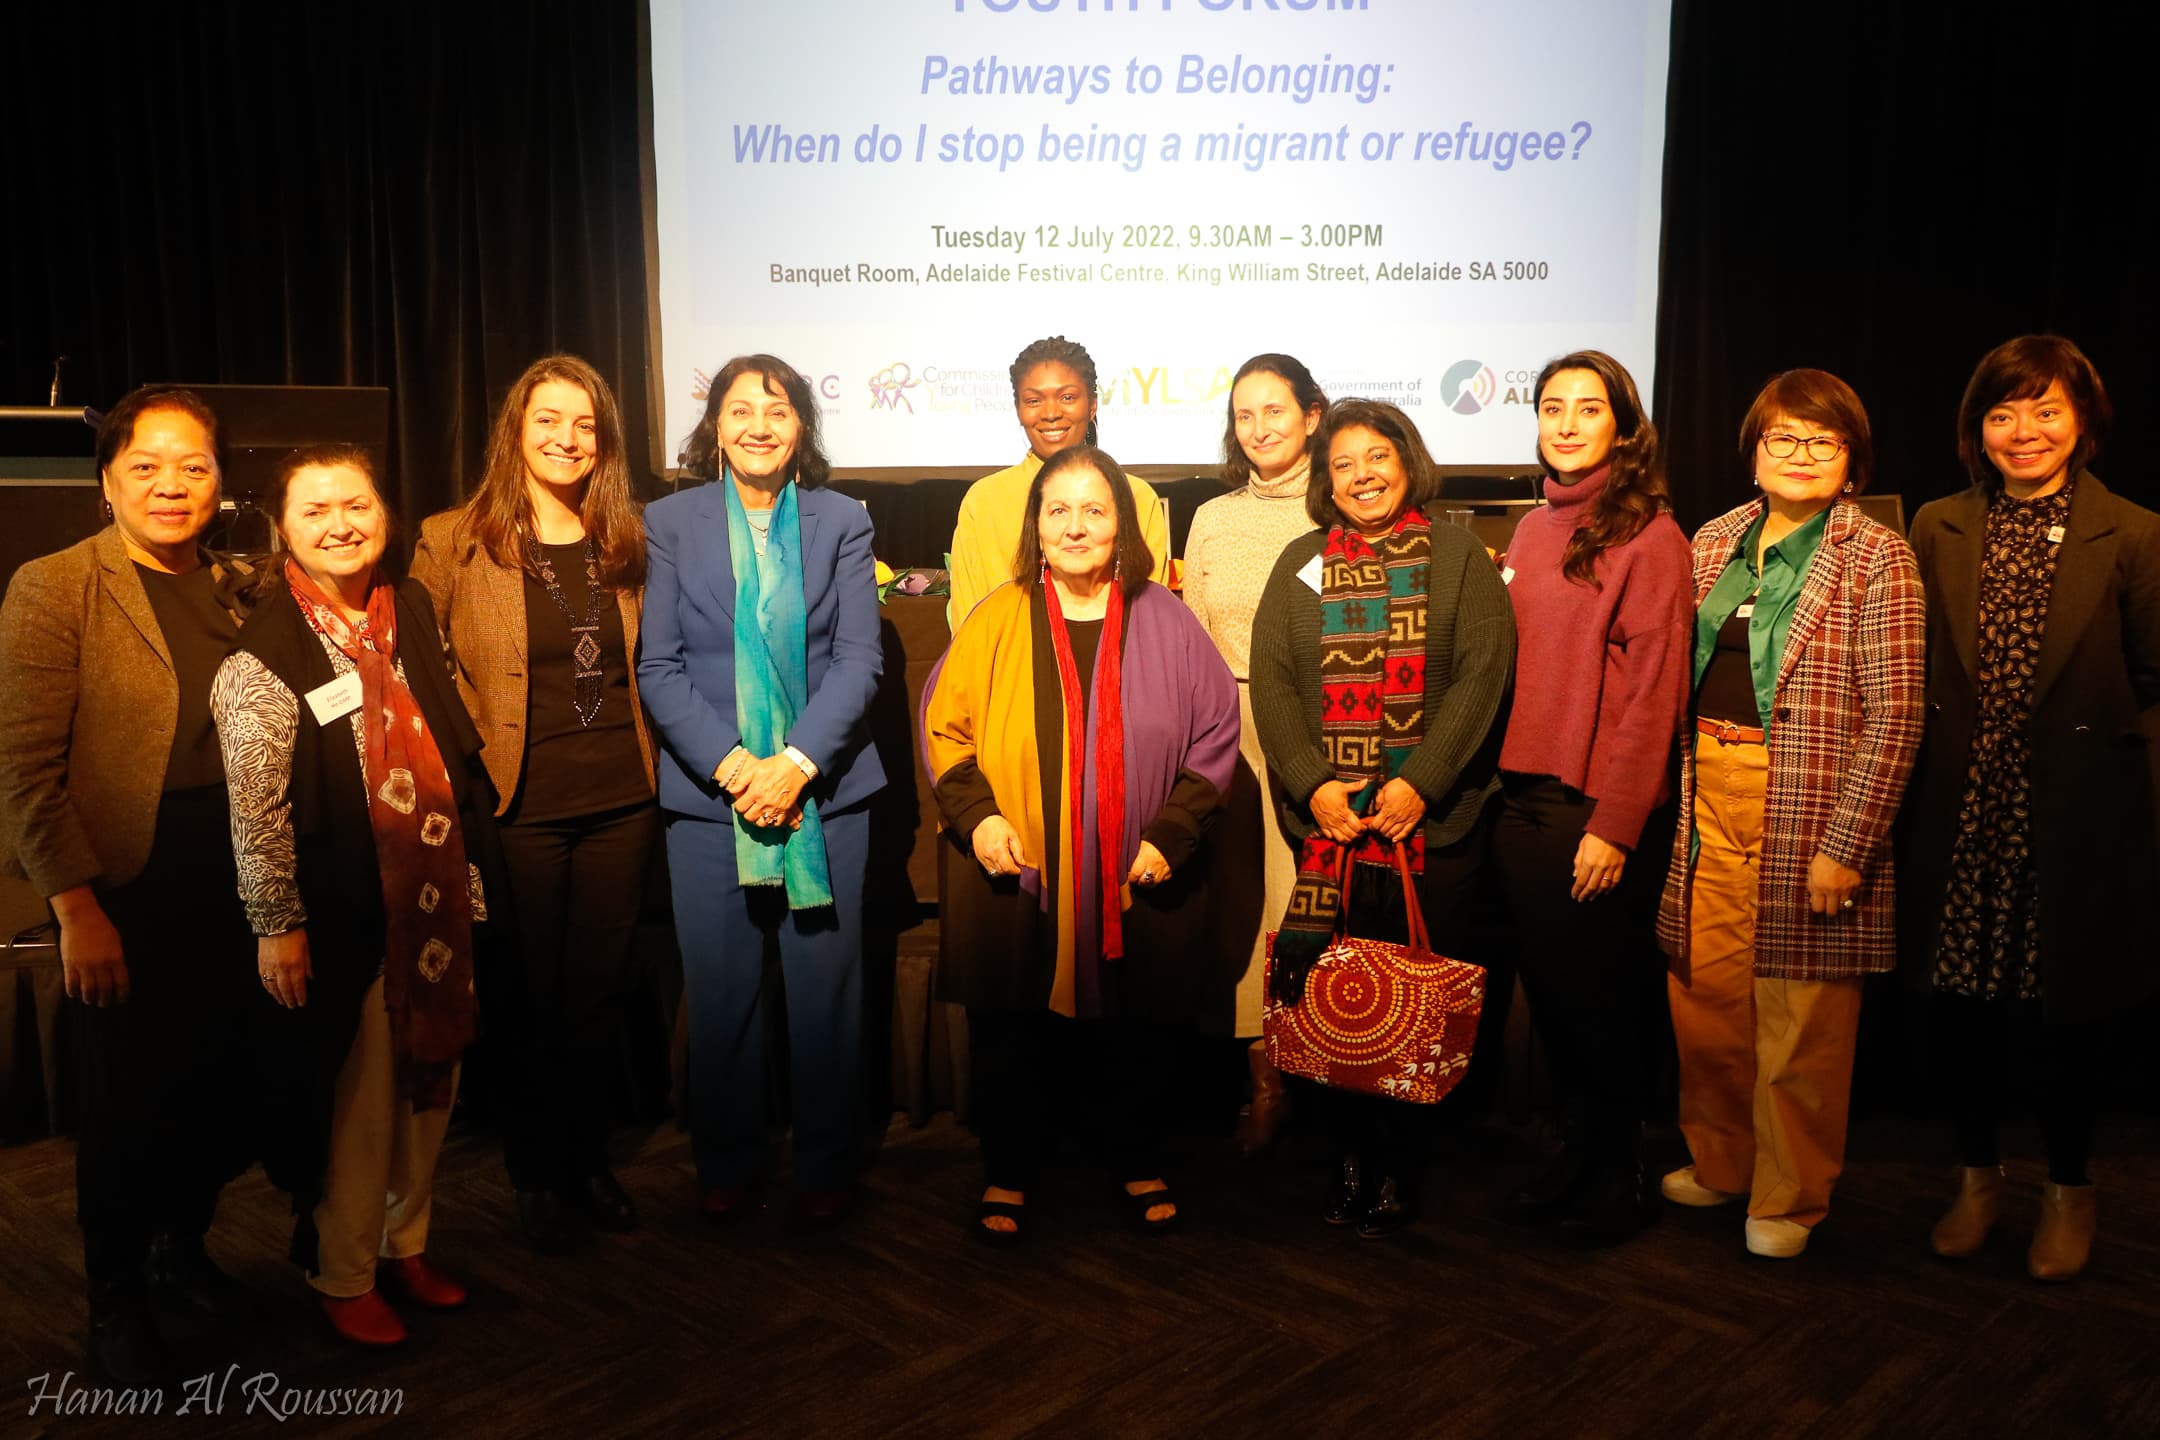  Prof. Tahereh Ziaian and her UniSA team with Australian industry partners from the Australian Migrant Resource Centre (AMRC).